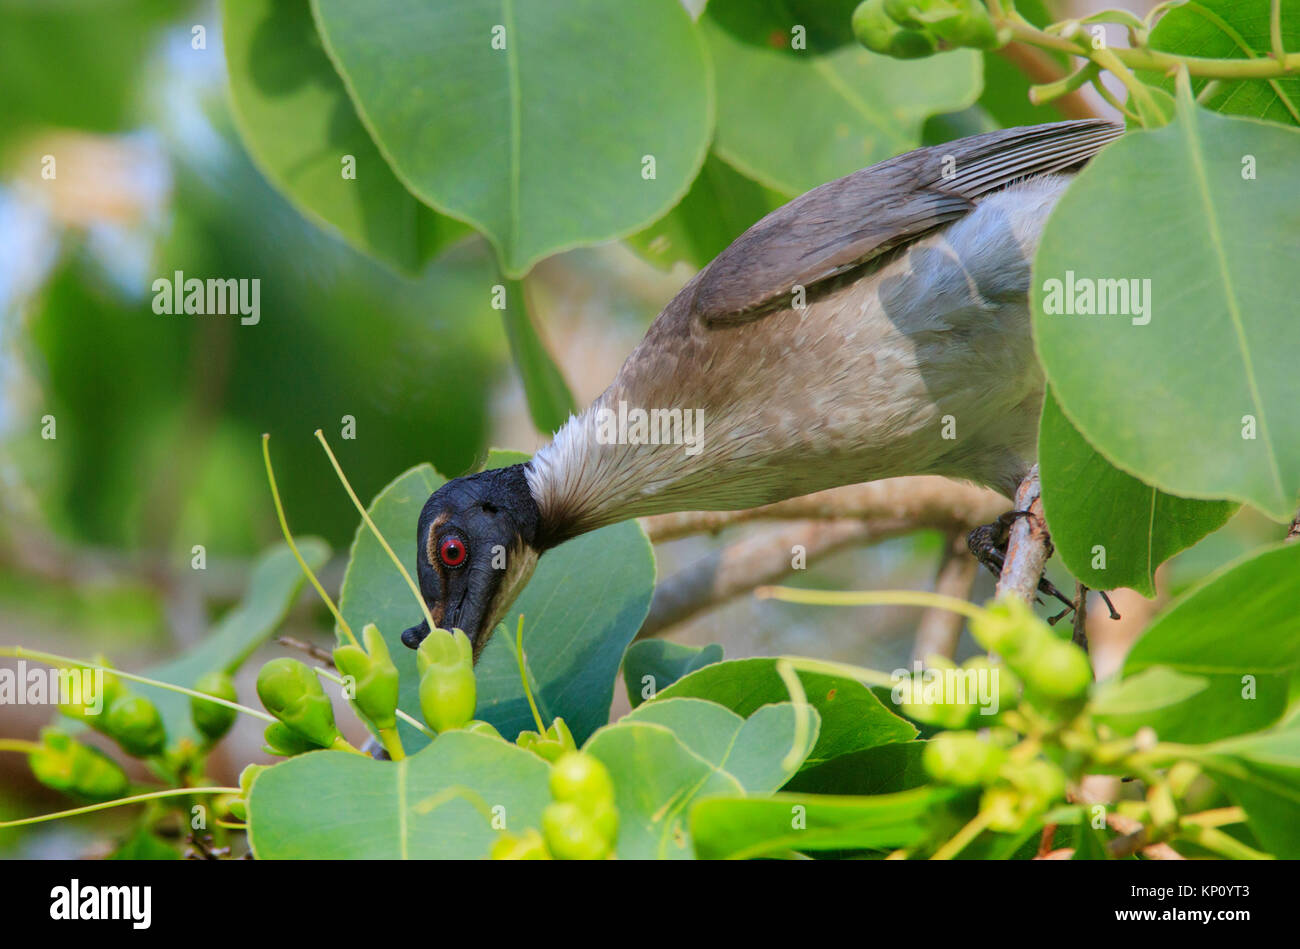 A Noisy Friarbird, Philemon corniculatus, feeding on nectar while purched in a tree with lush green leaves Stock Photo